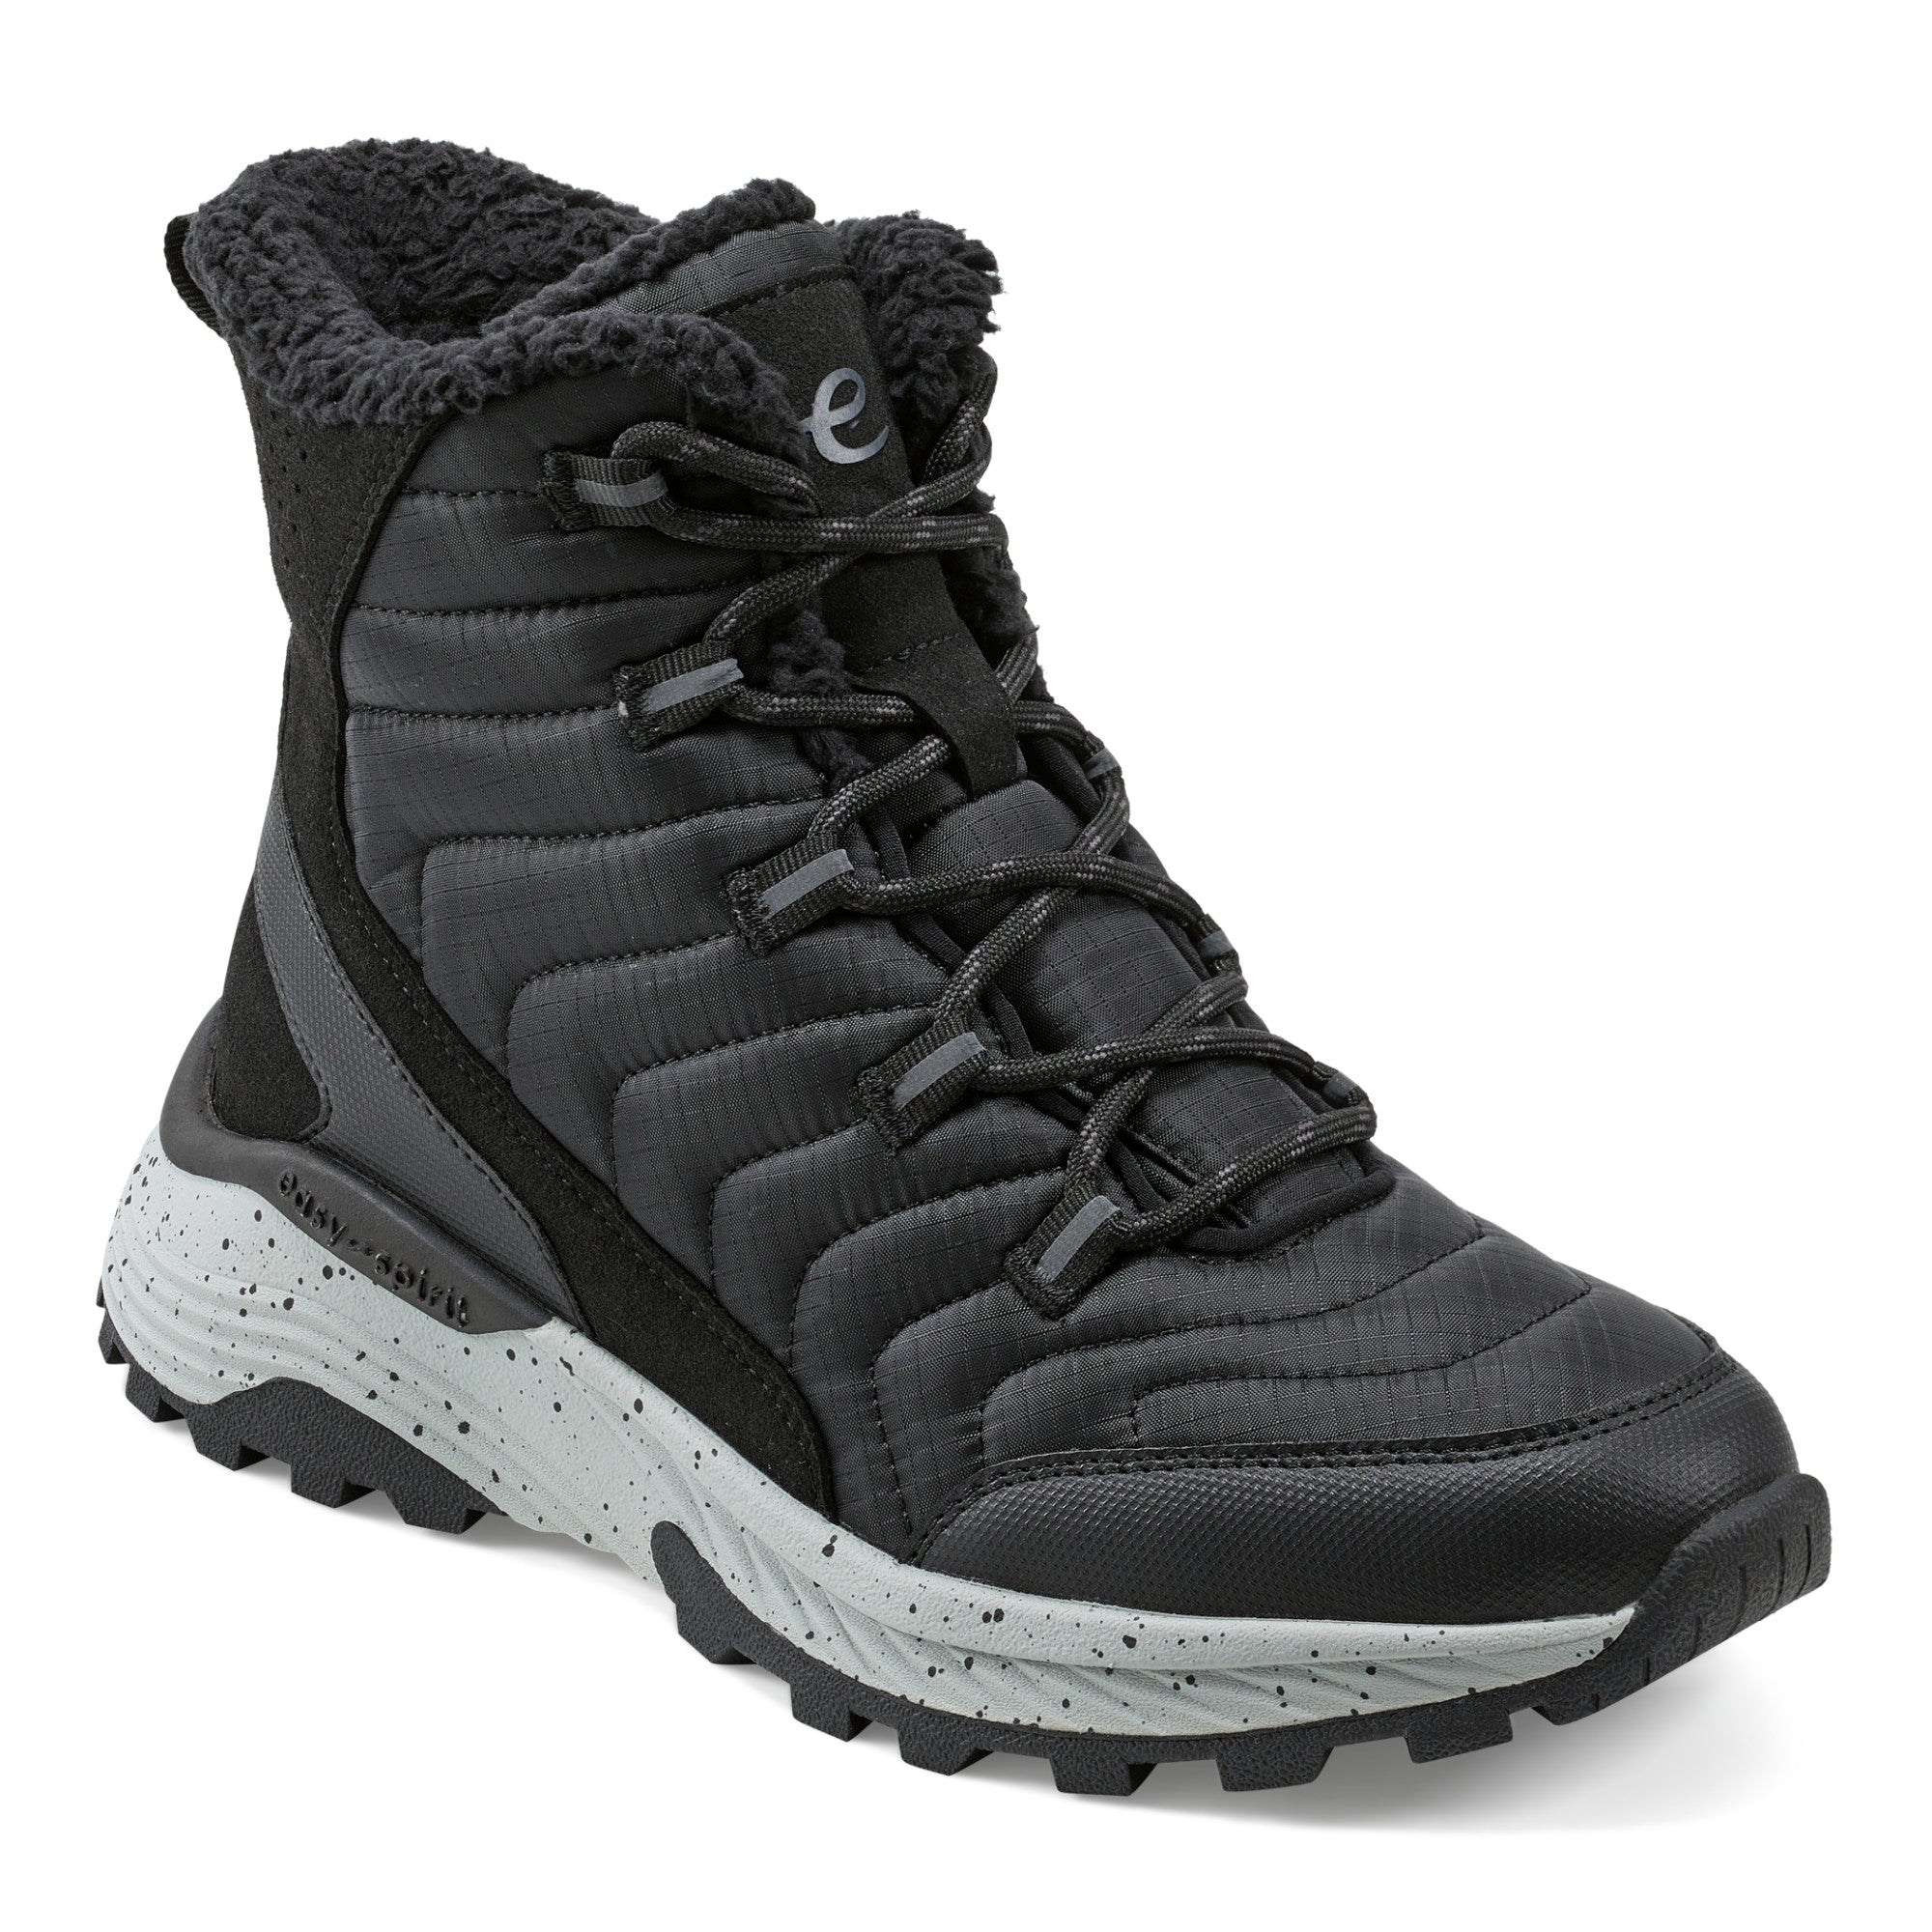 Marnie - Casual All Weather Boot